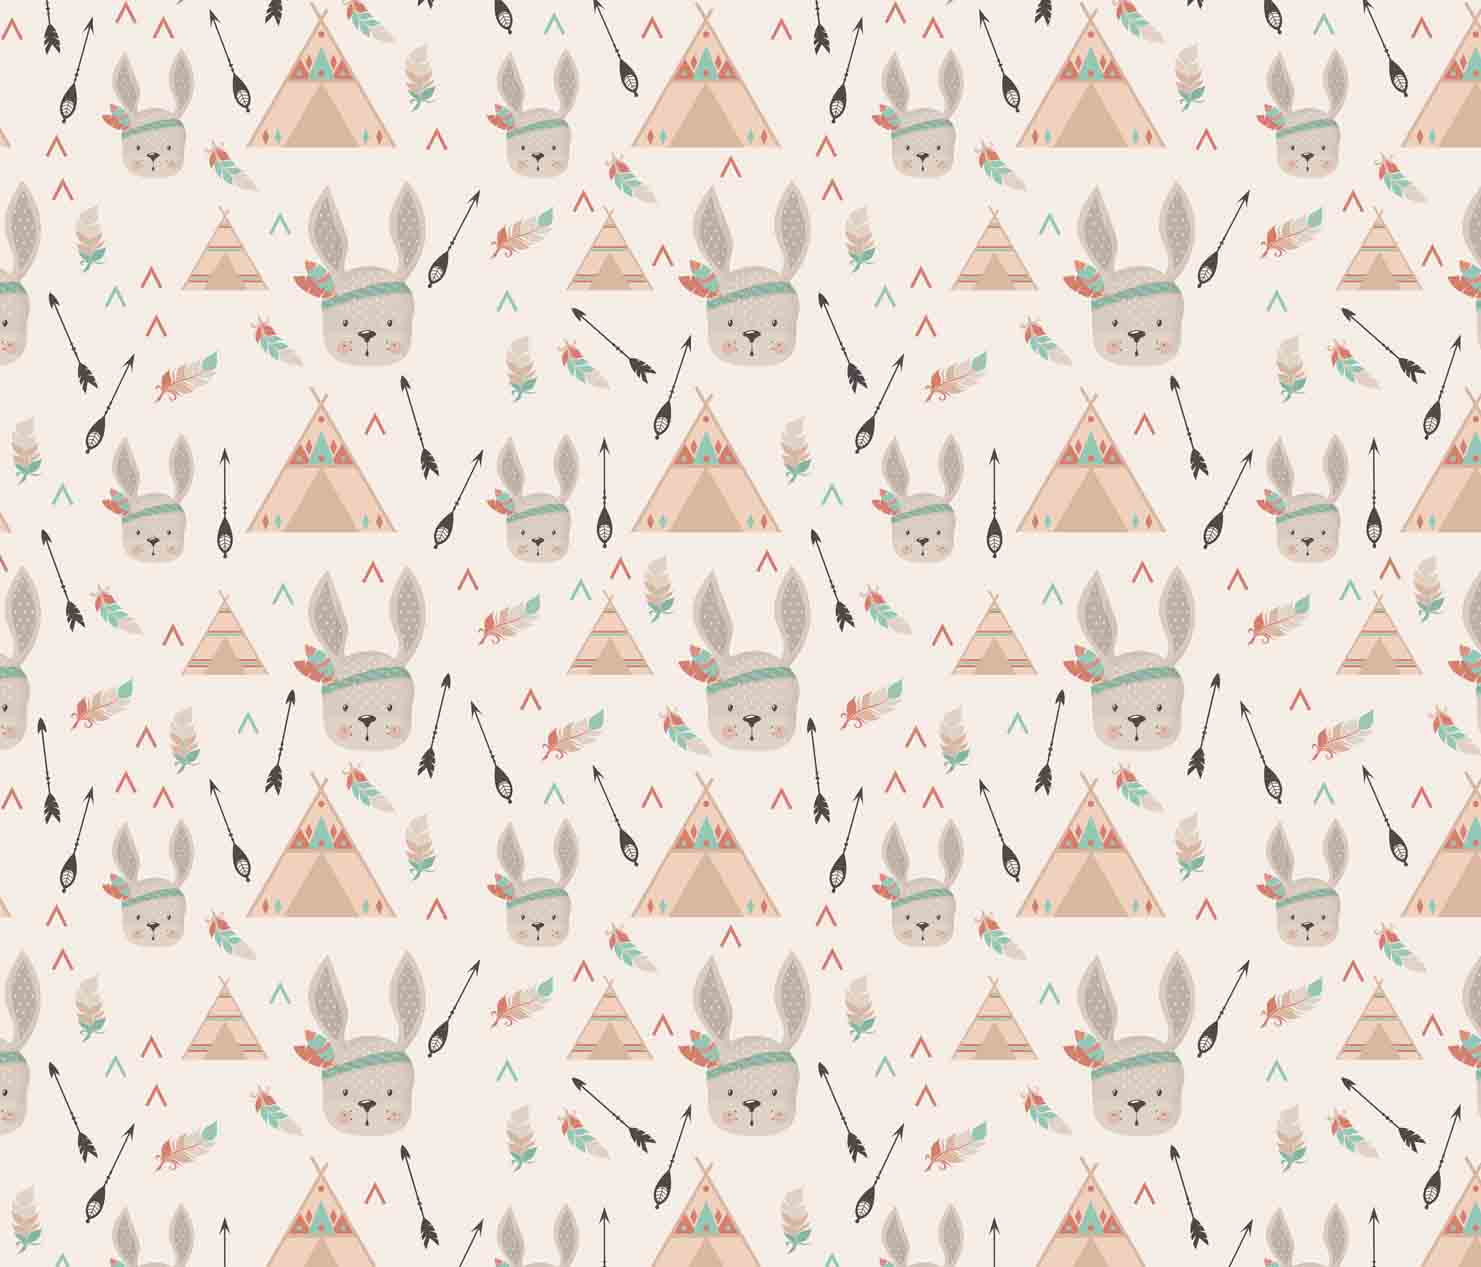 Bunny and Arrow Tribal Theme Repeat Pattern for Kids Room